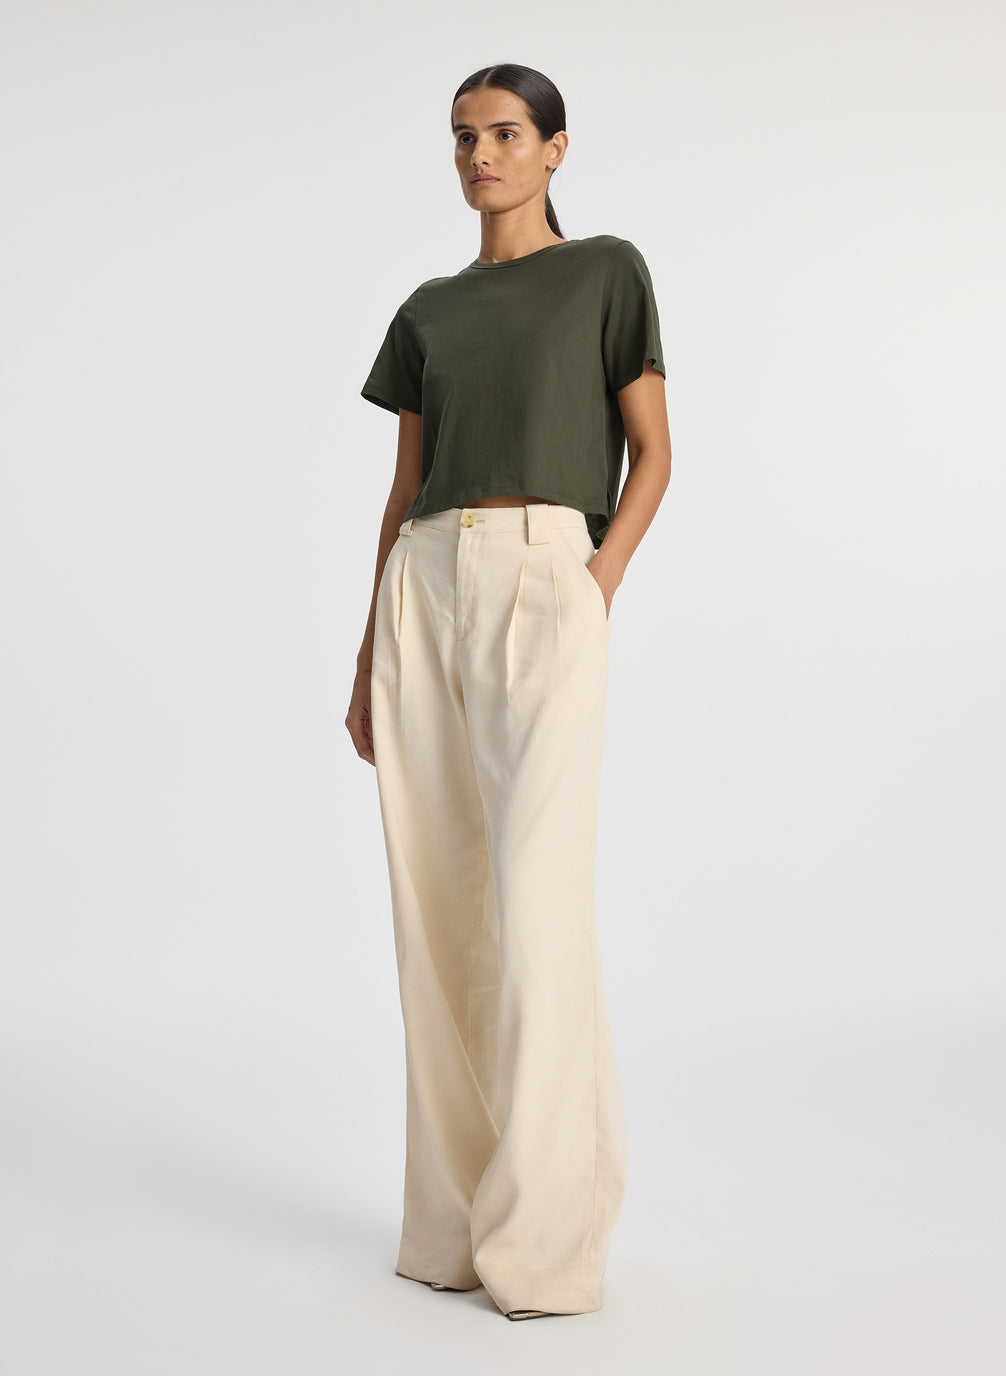 side view of woman wearing olive green short sleeve tshirt and beige wide leg pants